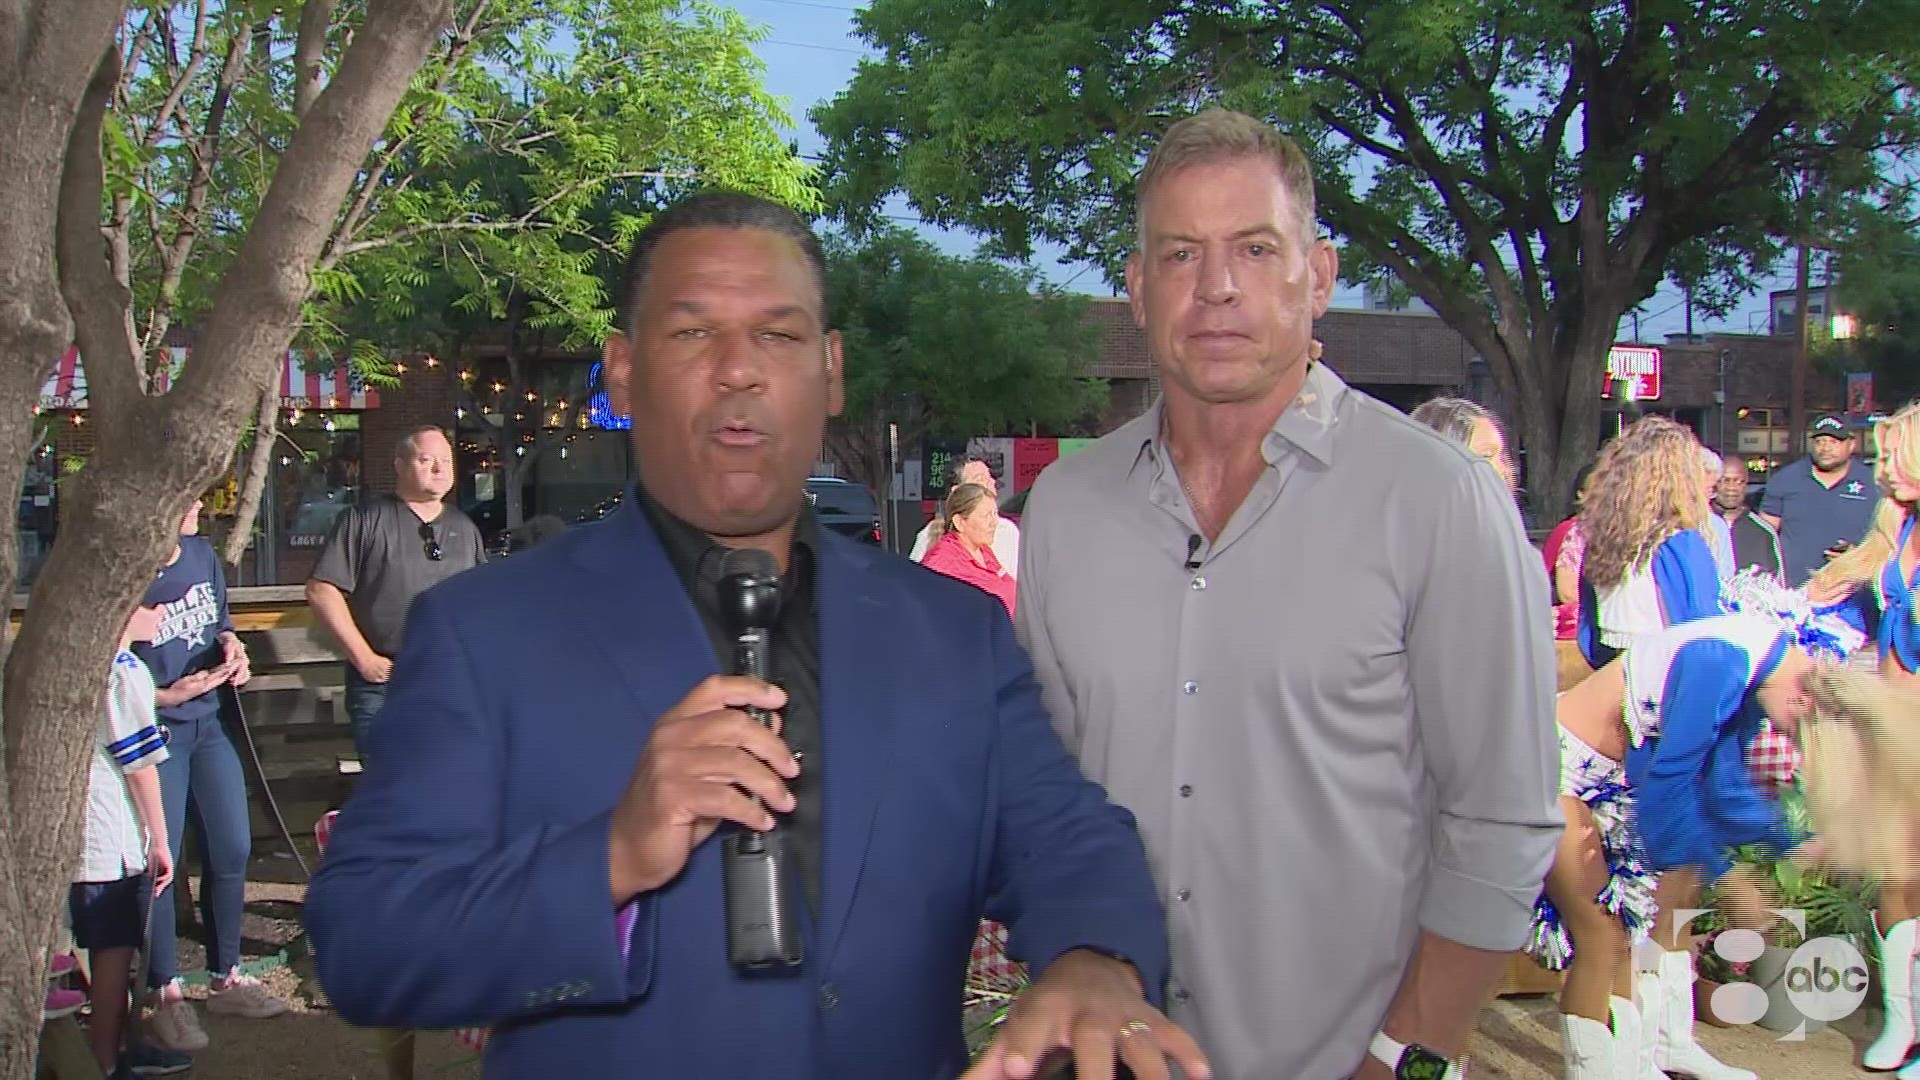 Cowboys legend and now Monday Night Football color commentator Troy Aikman spoke exclusively with WFAA on the Dallas Cowboys, some good ole Texas barbecue and more!